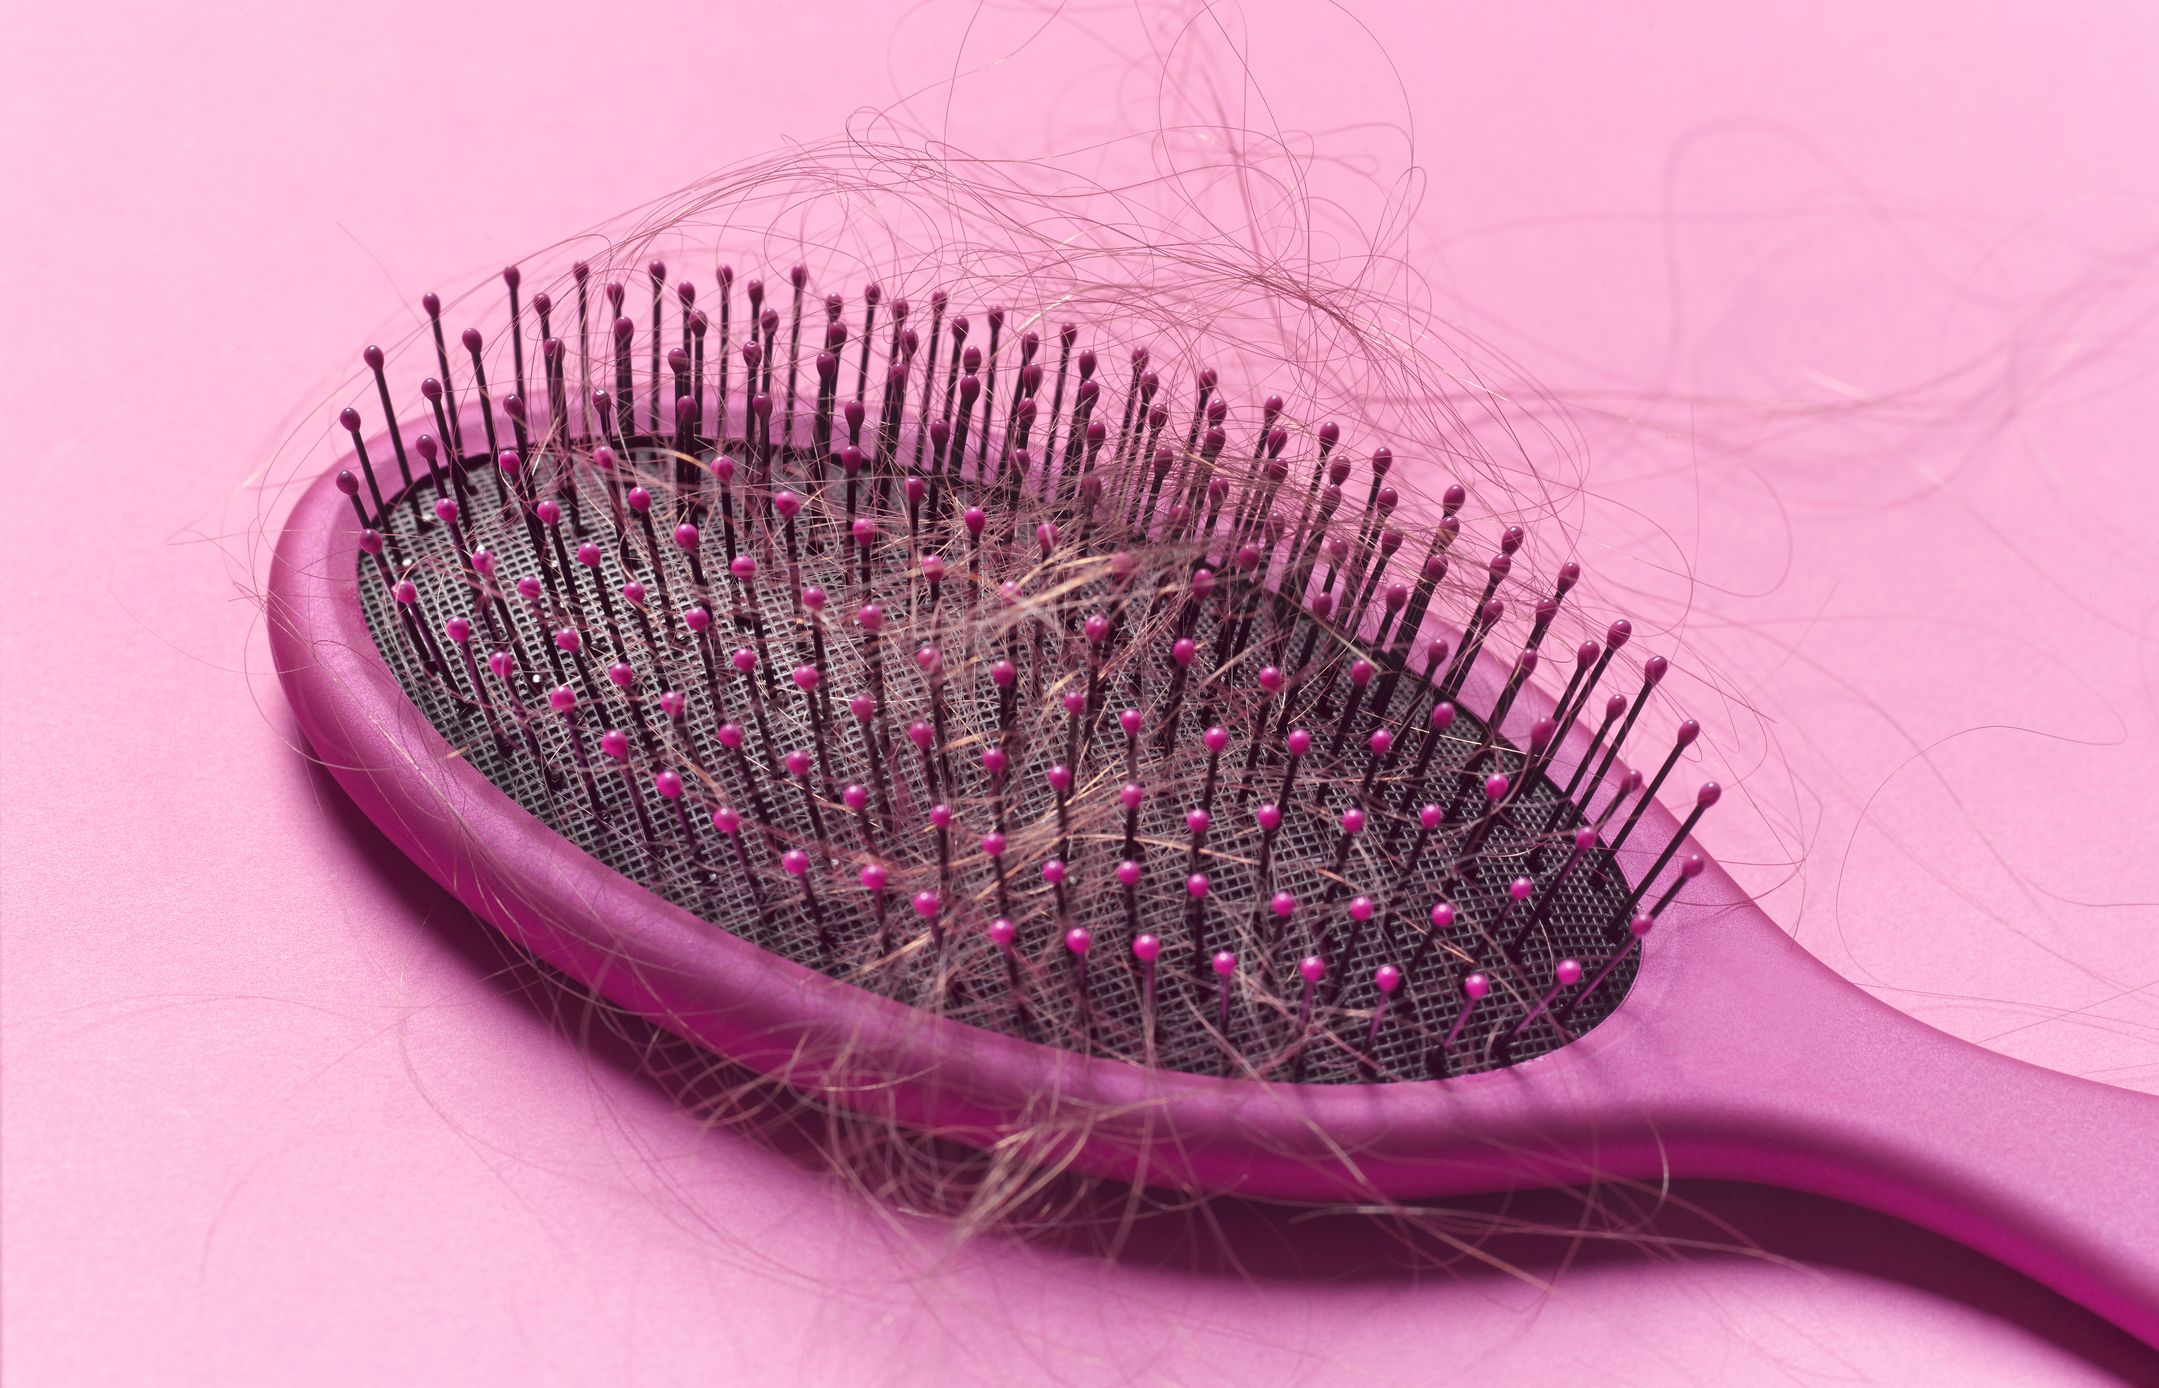 Dwell Formuler Nemlig How to Clean Your Hairbrush the Right Way, Per Experts